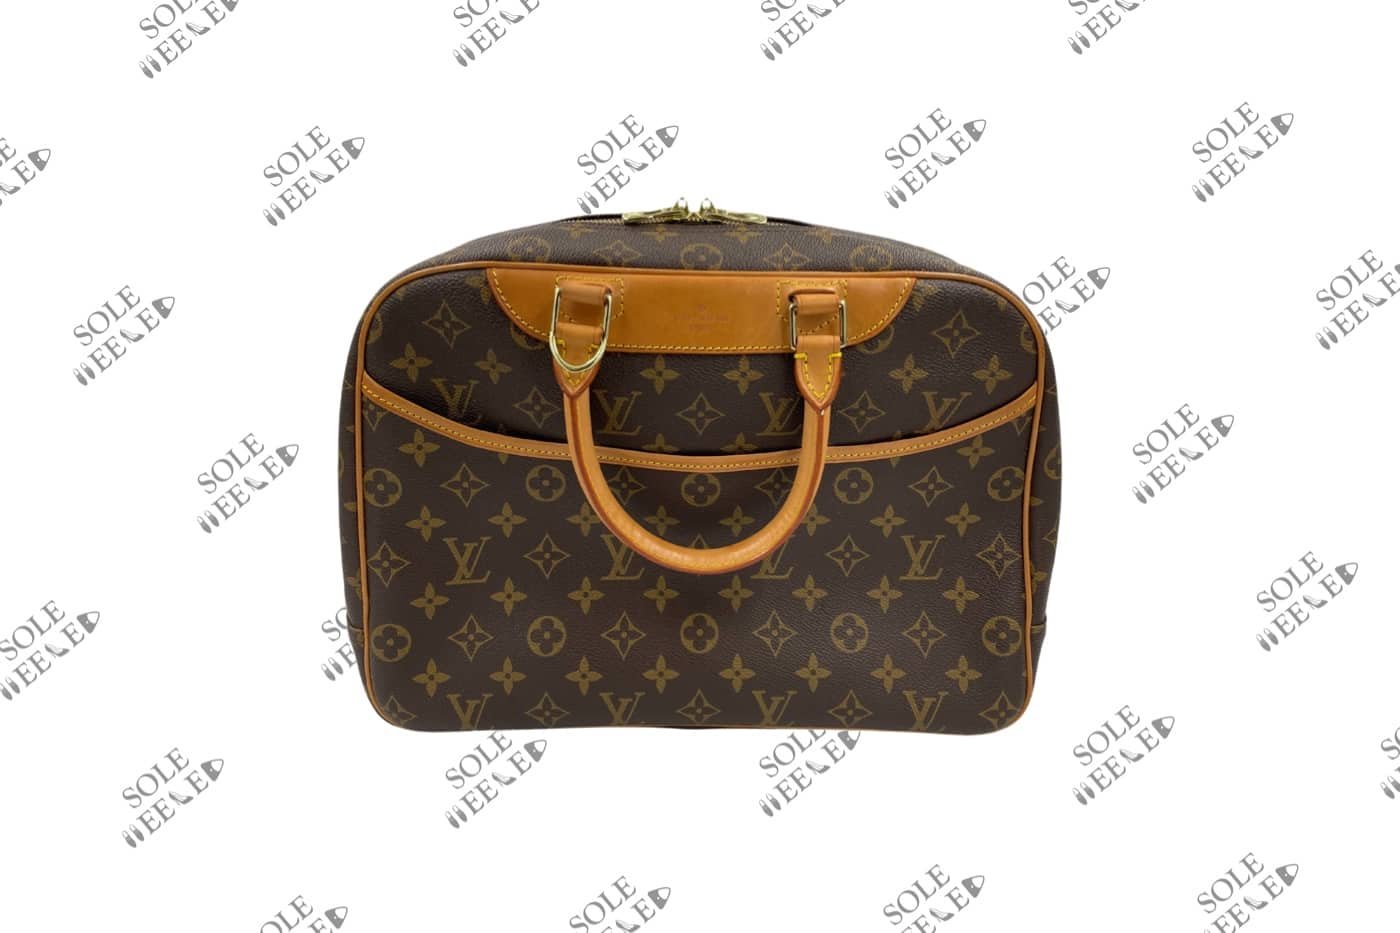 serial number vintage louis vuitton interior lining